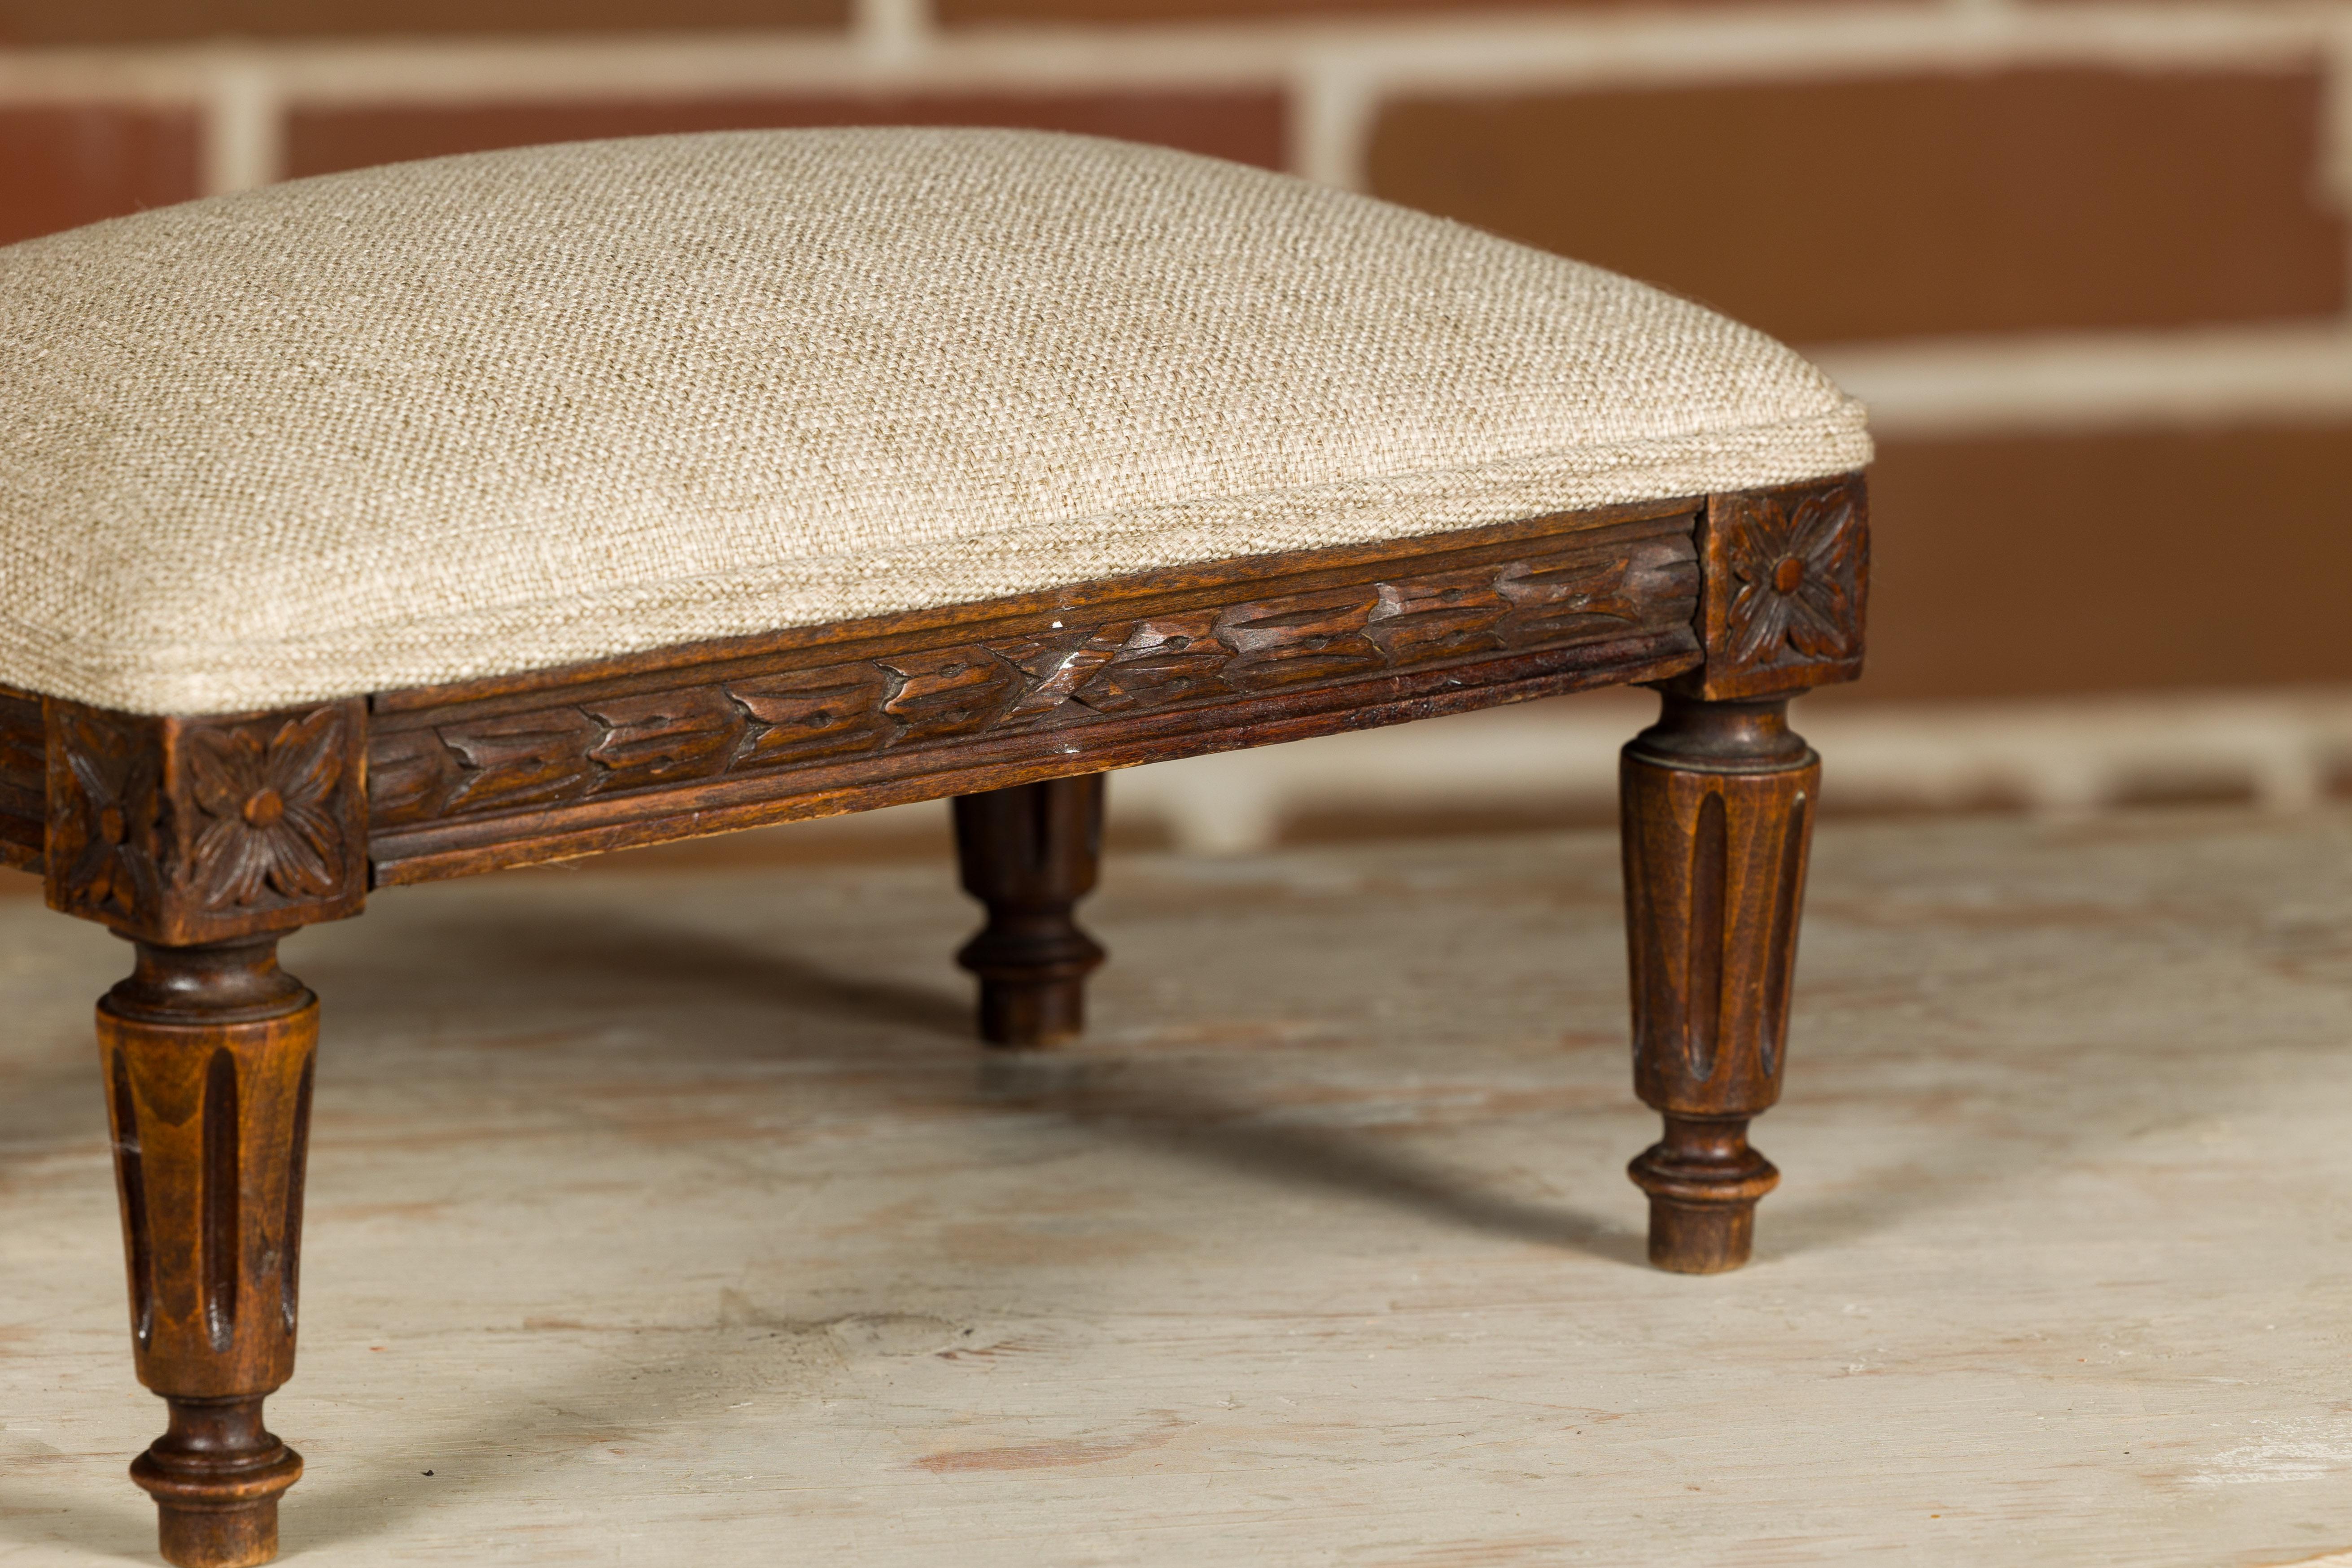 French Louis XVI Style 19th Century Footstool with Carved Décor and Fluted Legs For Sale 7